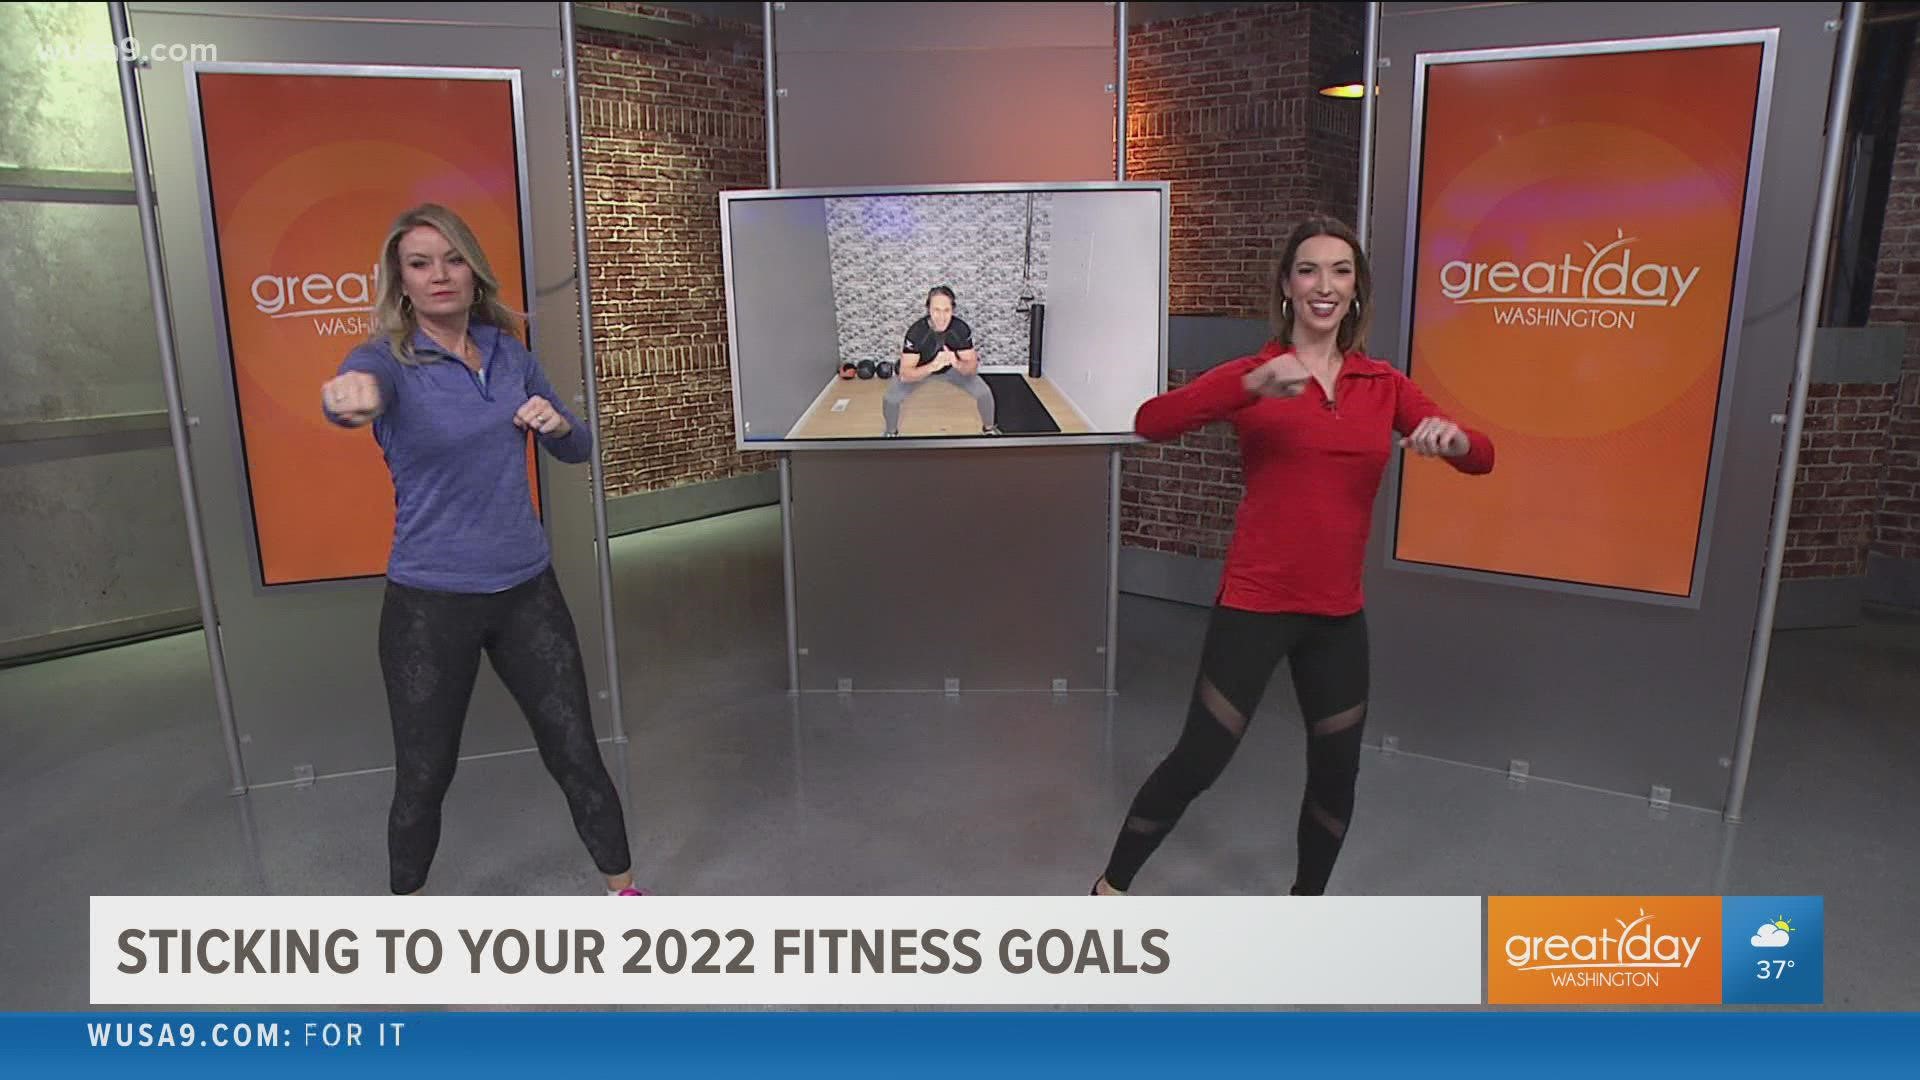 Fitness dynamo Laurent Amzallag is back with tips to help stick to your workout resolutions throughout 2022.  Check out his blog at yalafitness.com for weekly tips.